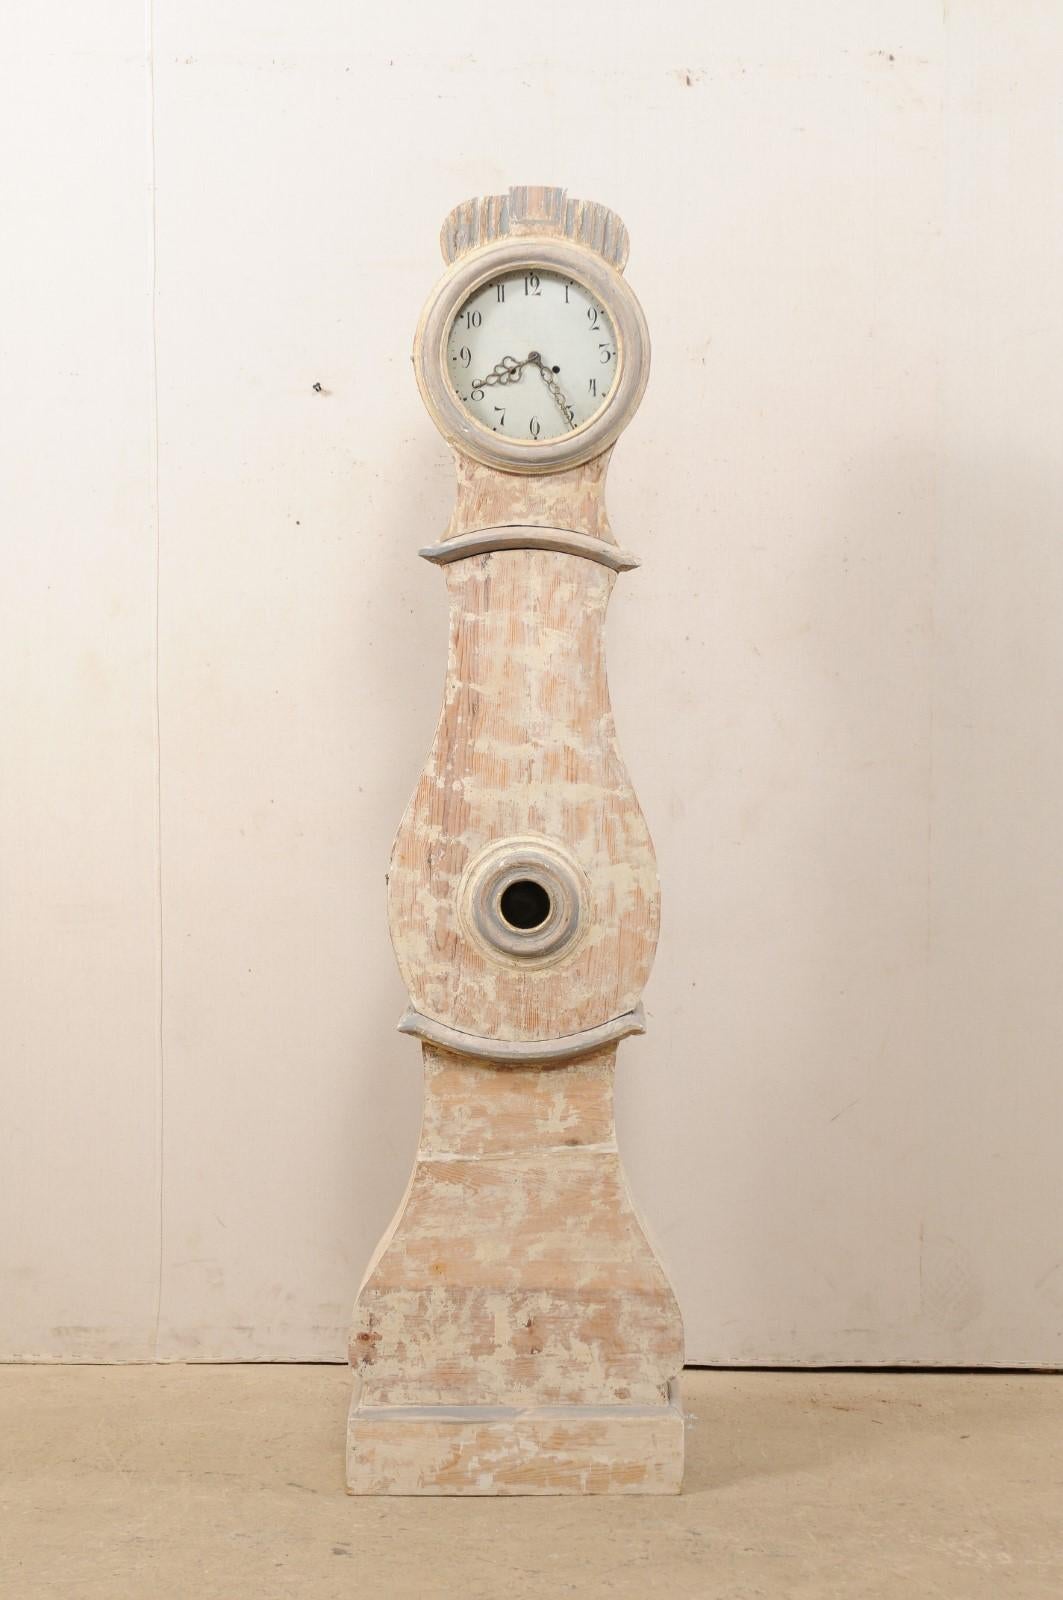 A Swedish grandfather clock with scraped finish from the 19th century. This antique clock from Sweden features a low profile reed carved crown adorning it's head, a teardrop-shaped belly with window at it's center, and is supported upon a flat